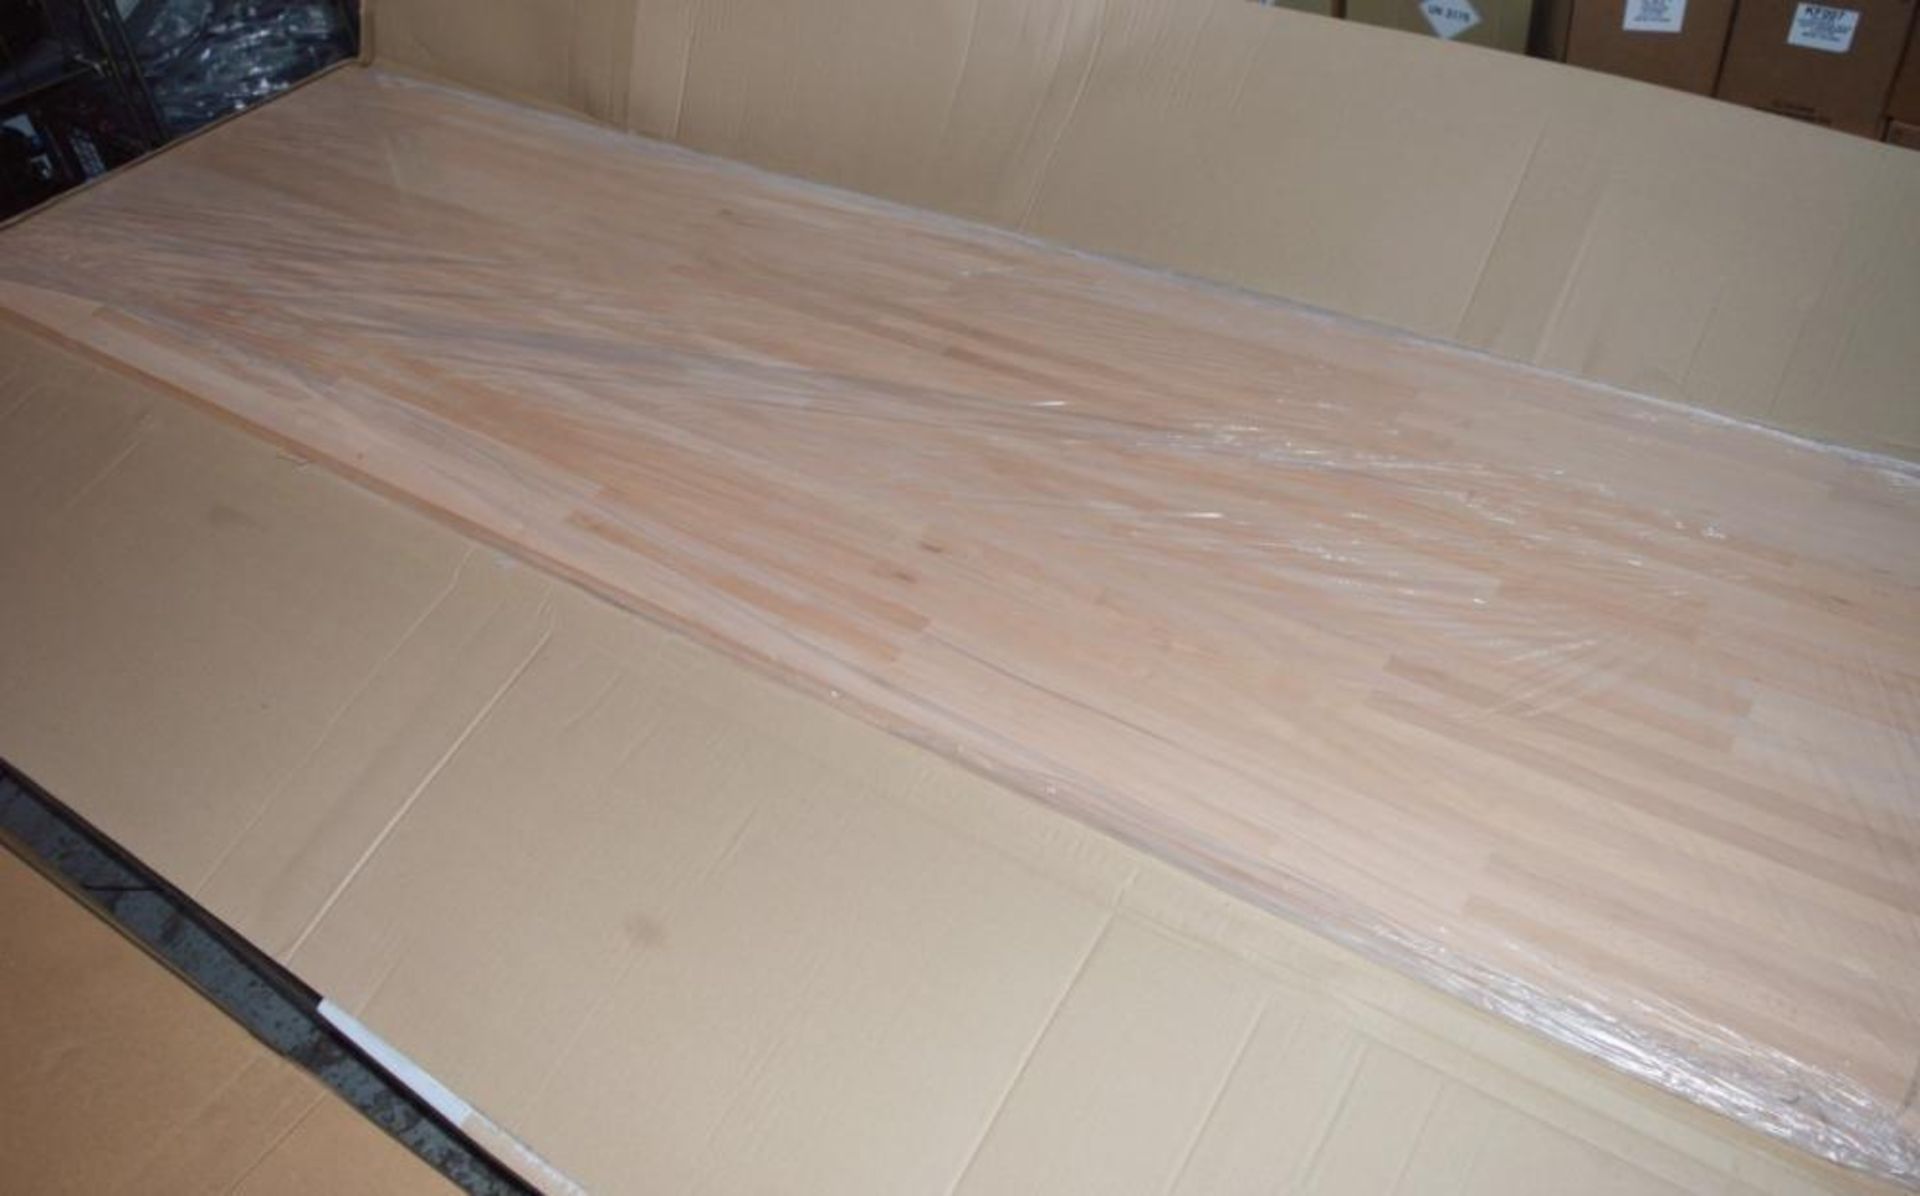 1 x Solid Wood Worktop - PRIME BEECH - First Grade Finger Jointed Kitchen Worktop - Ideal For - Image 3 of 4